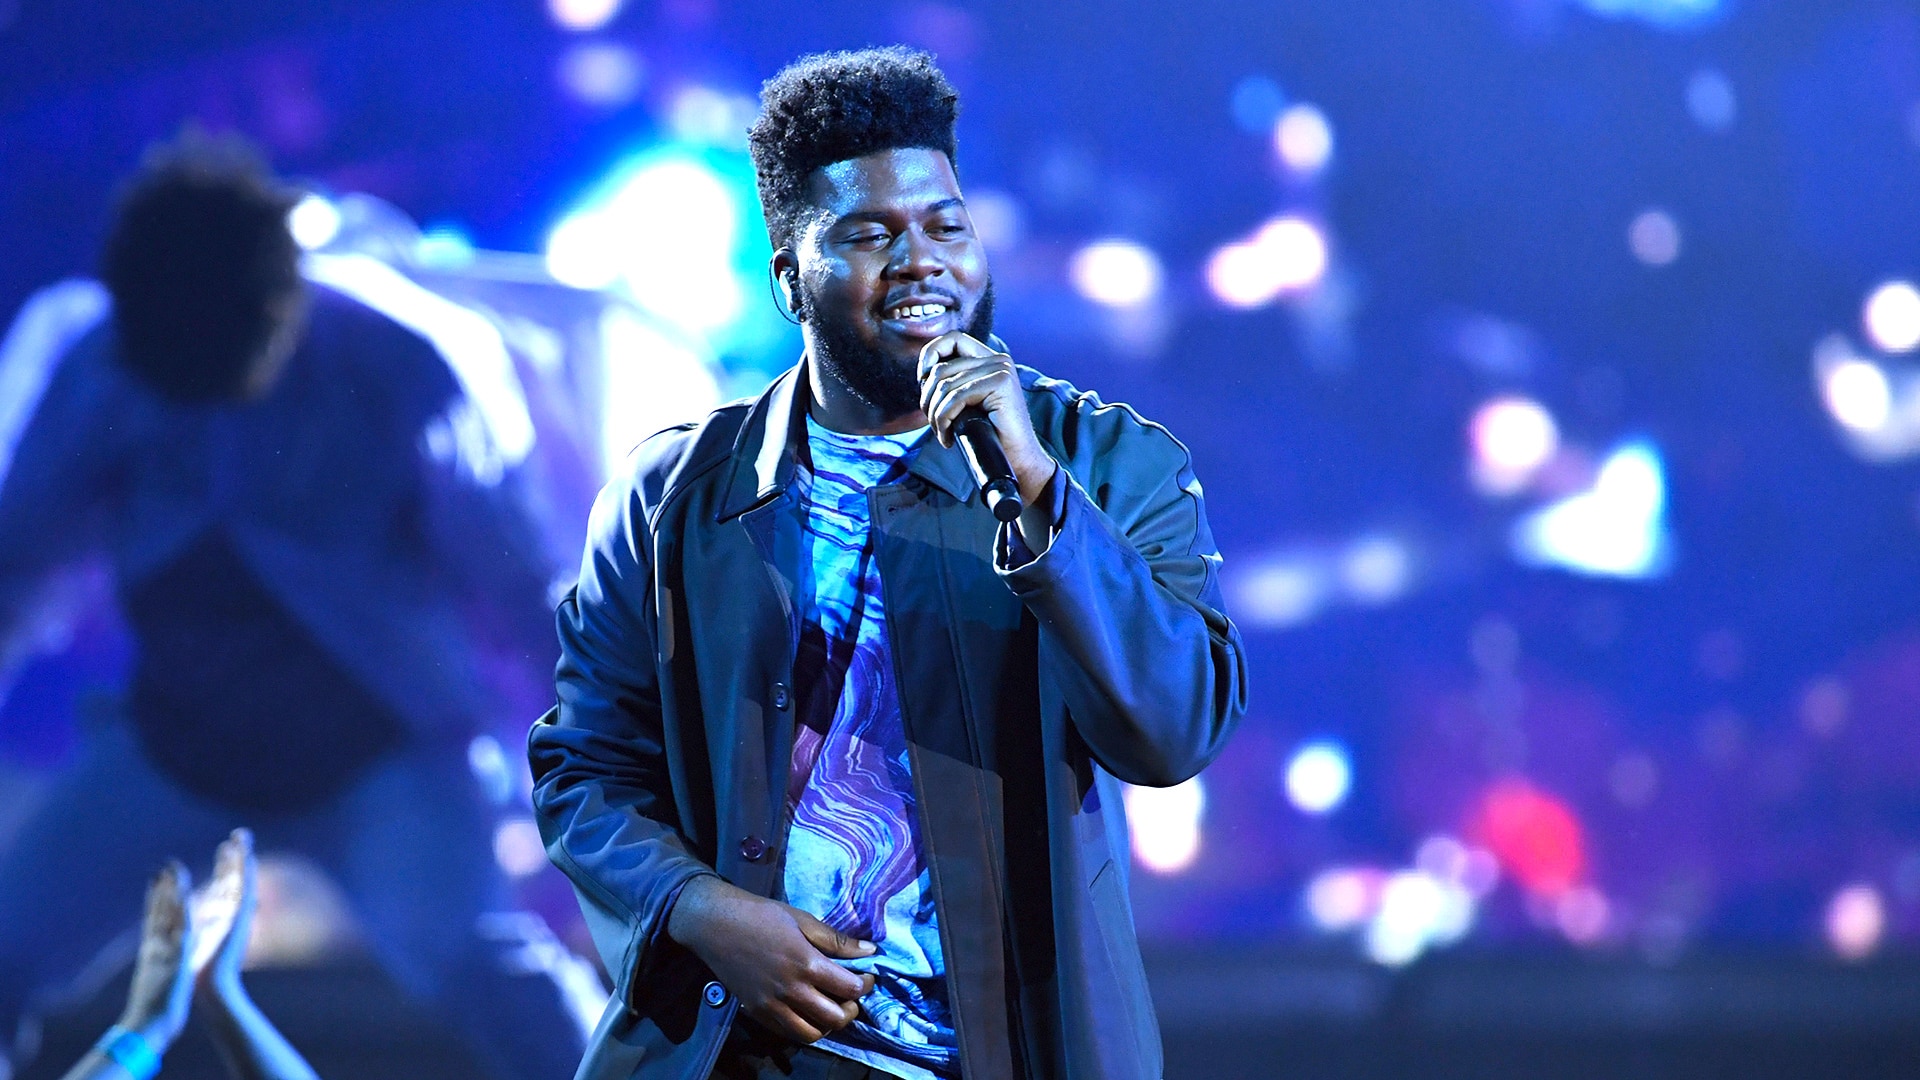 khalid nothing feels better free mp3 download